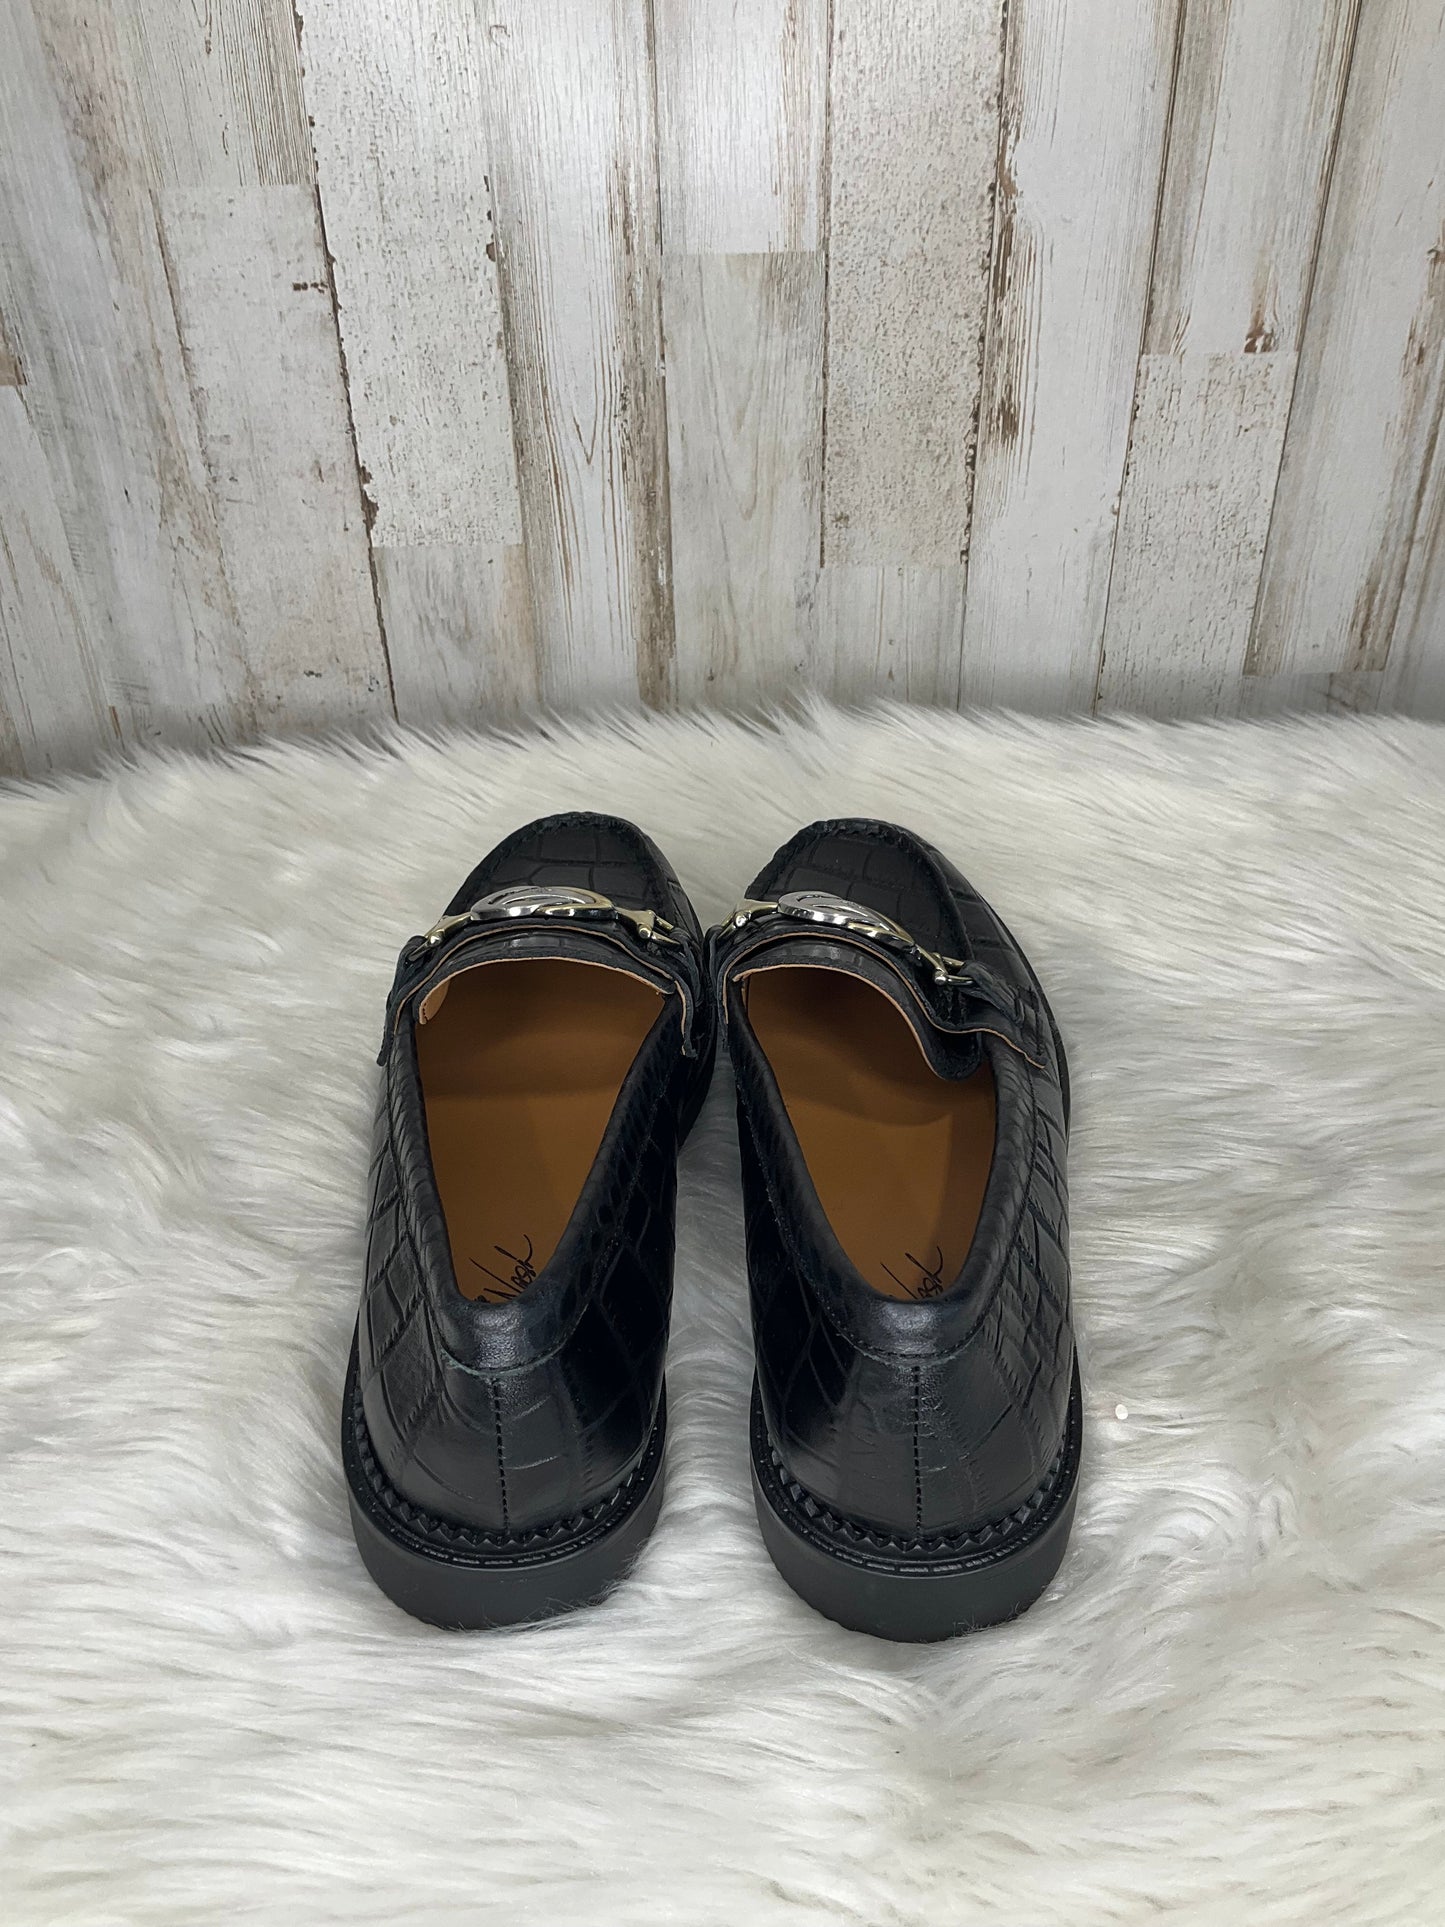 Shoes Flats Loafer Oxford By Patricia Nash  Size: 6